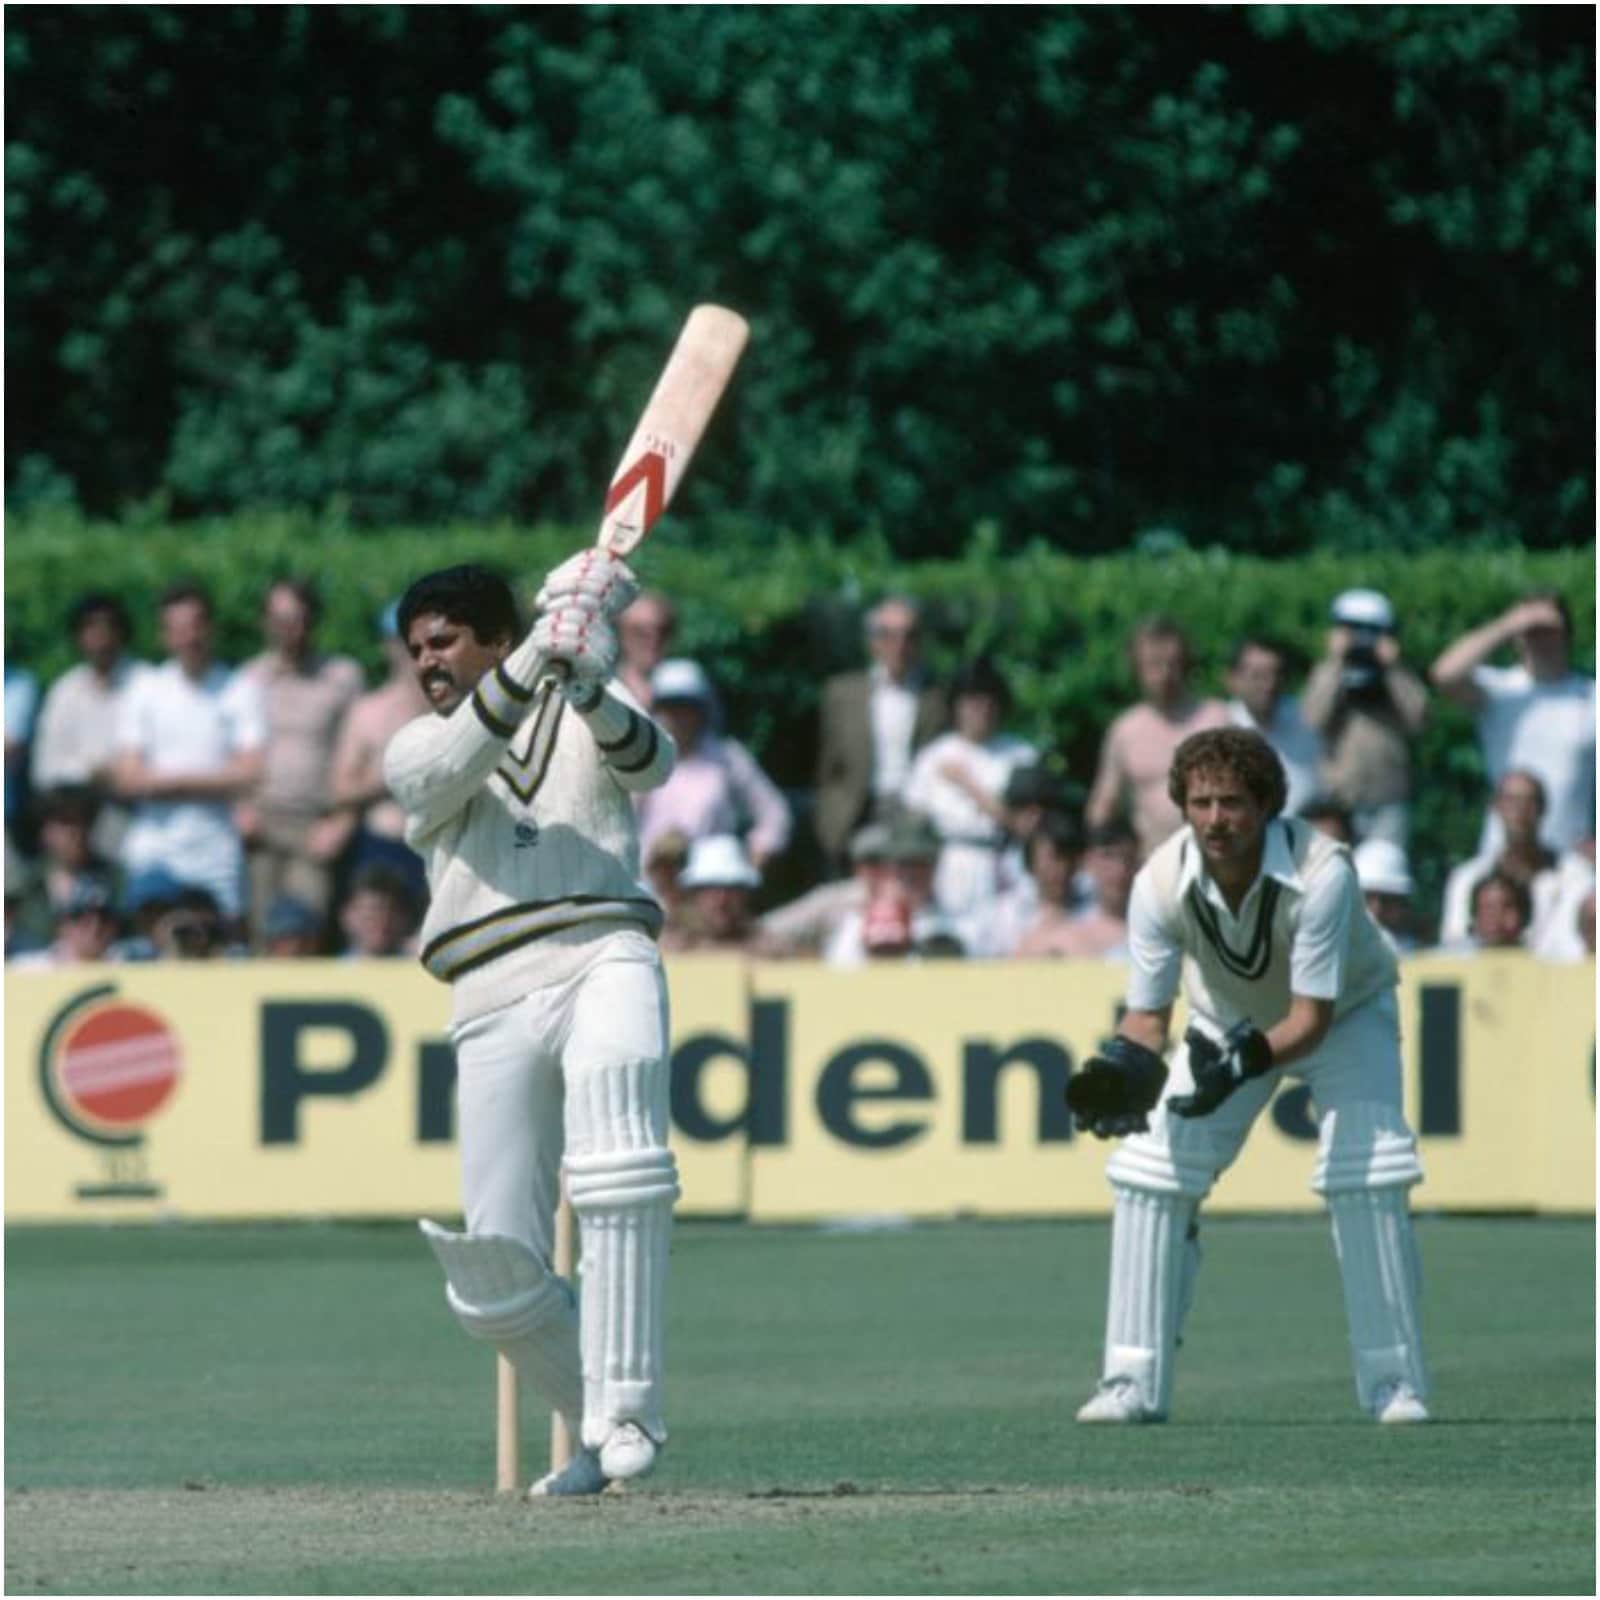 Kapil Dev finished with an unbeaten knock of 175 runs from 138 deliveries. (Image: Twitter/ICC)